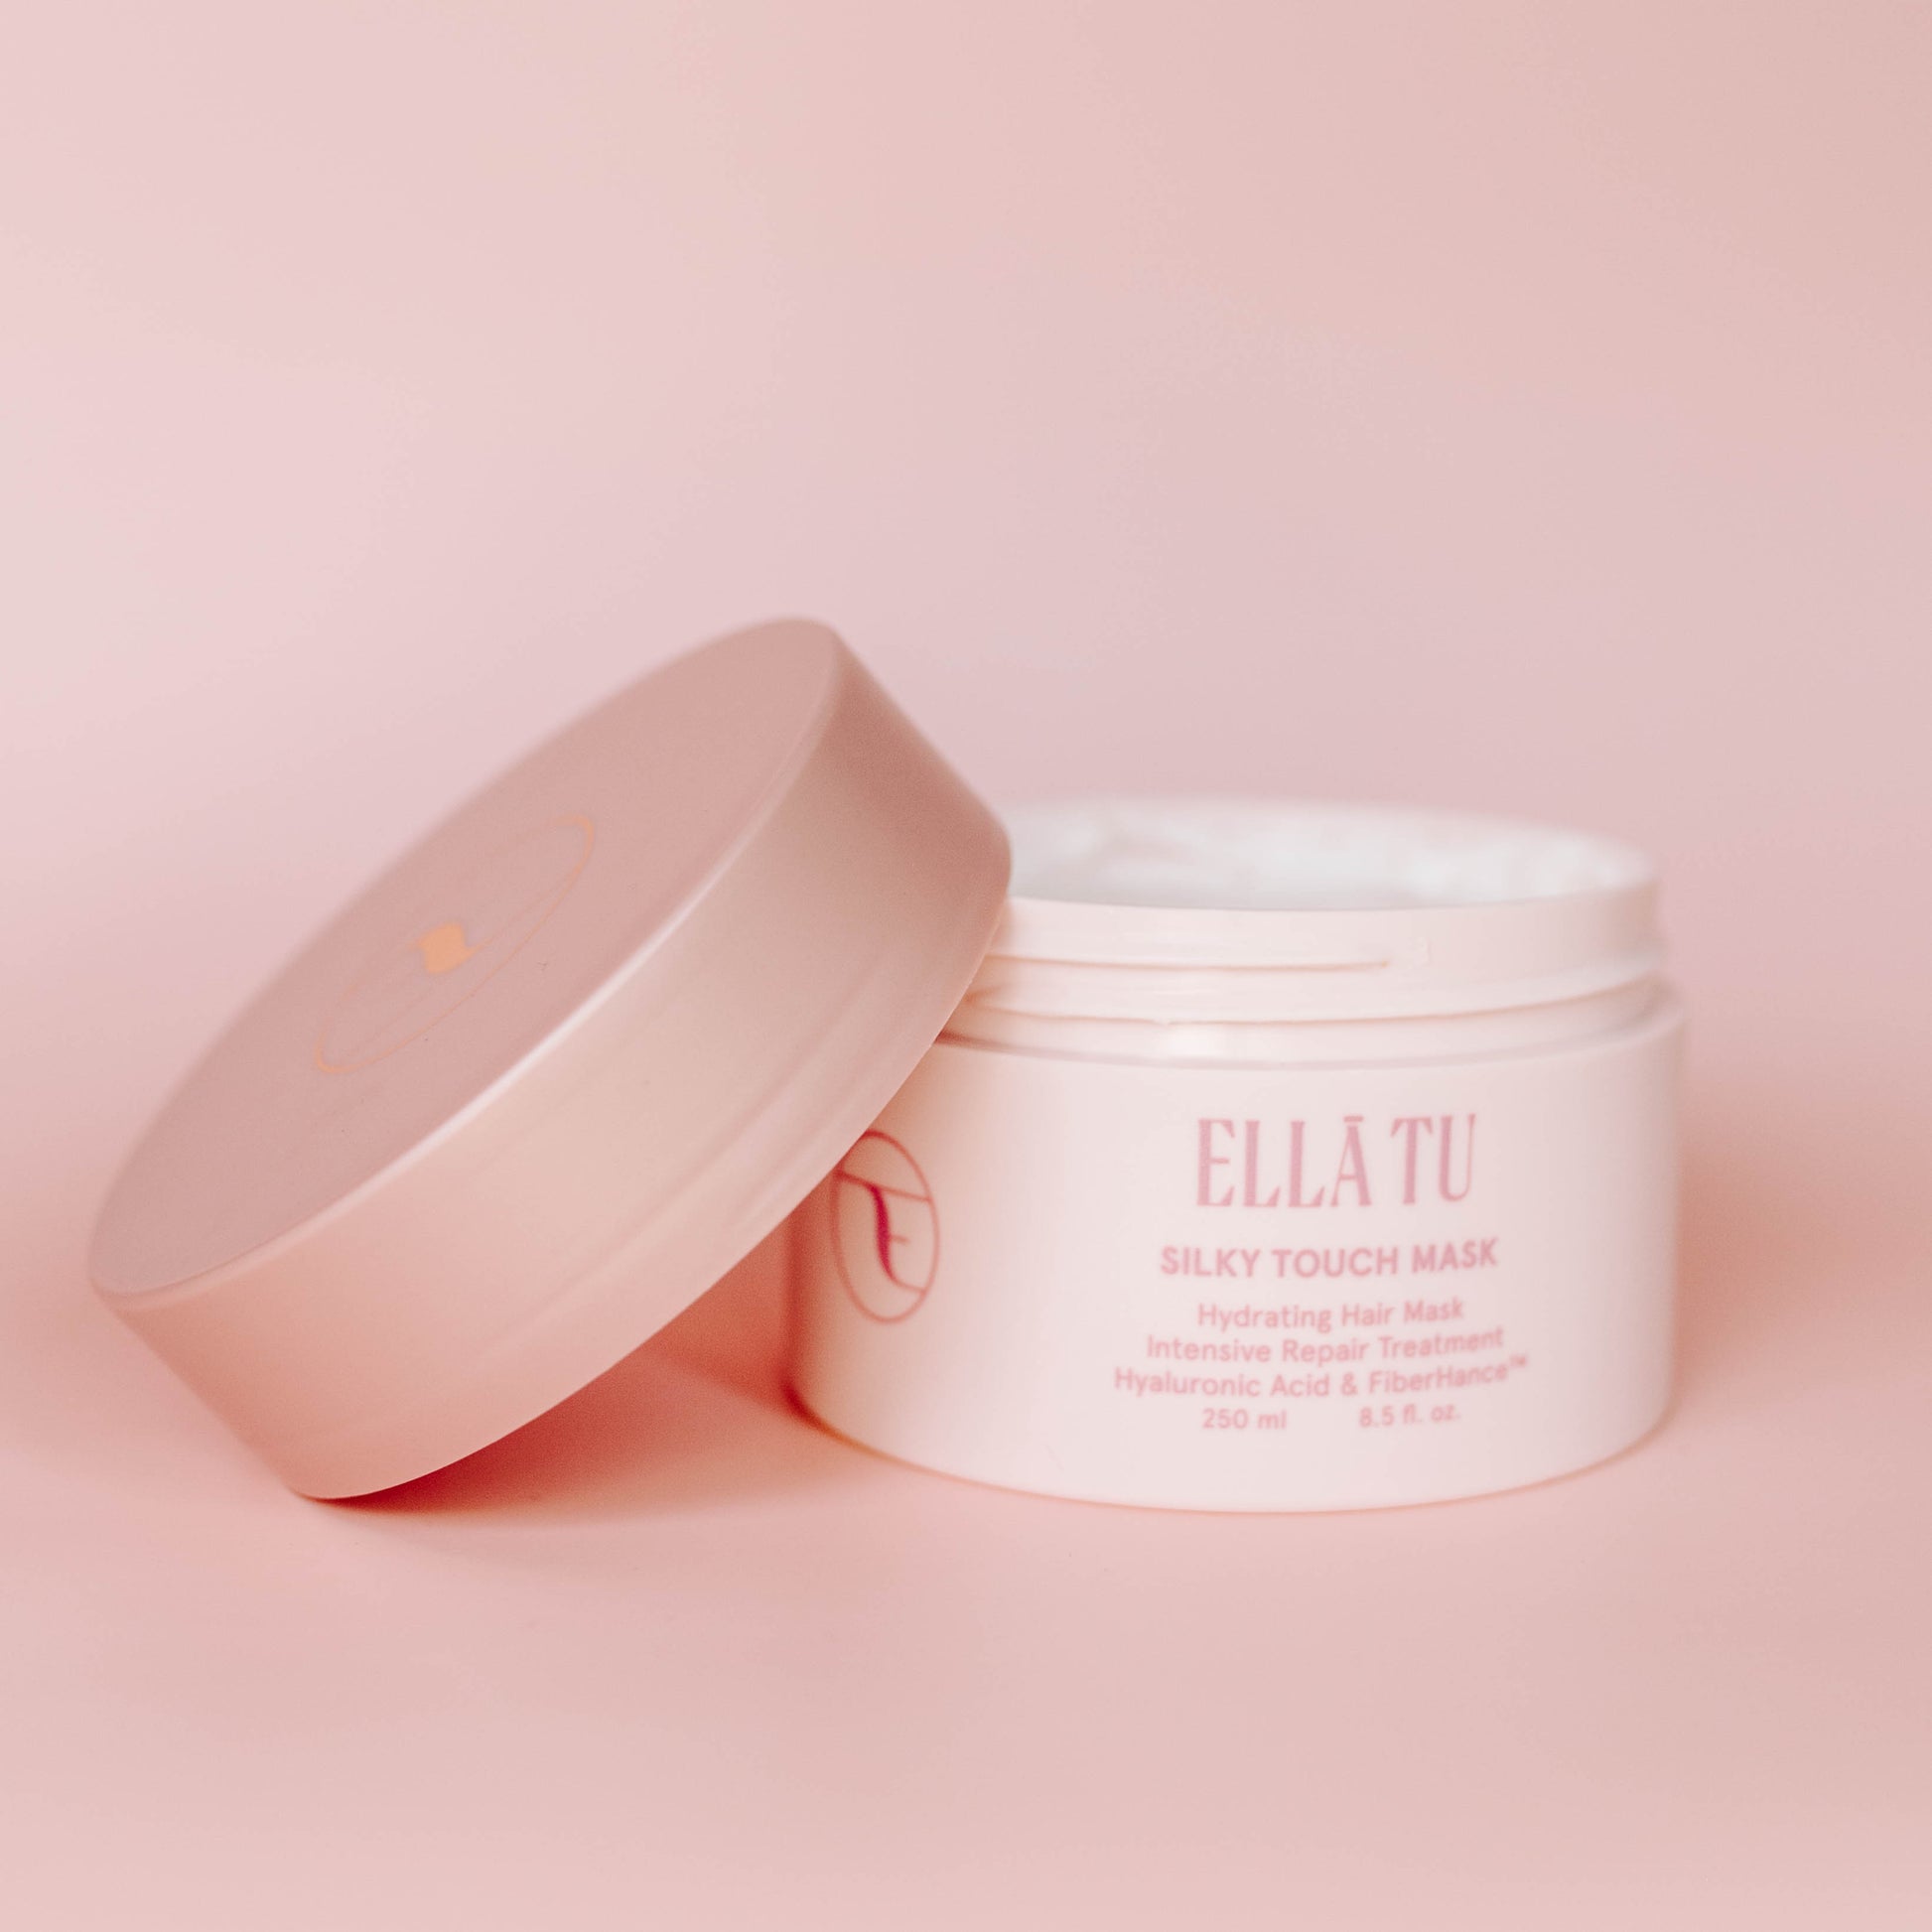 Transform dry, damaged hair into gloriously silky tresses. The Ellātu Silky Touch Hair Mask is infused with enriching ingredients that douse your hair with moisture—encouraging softness, shine, and manageability.